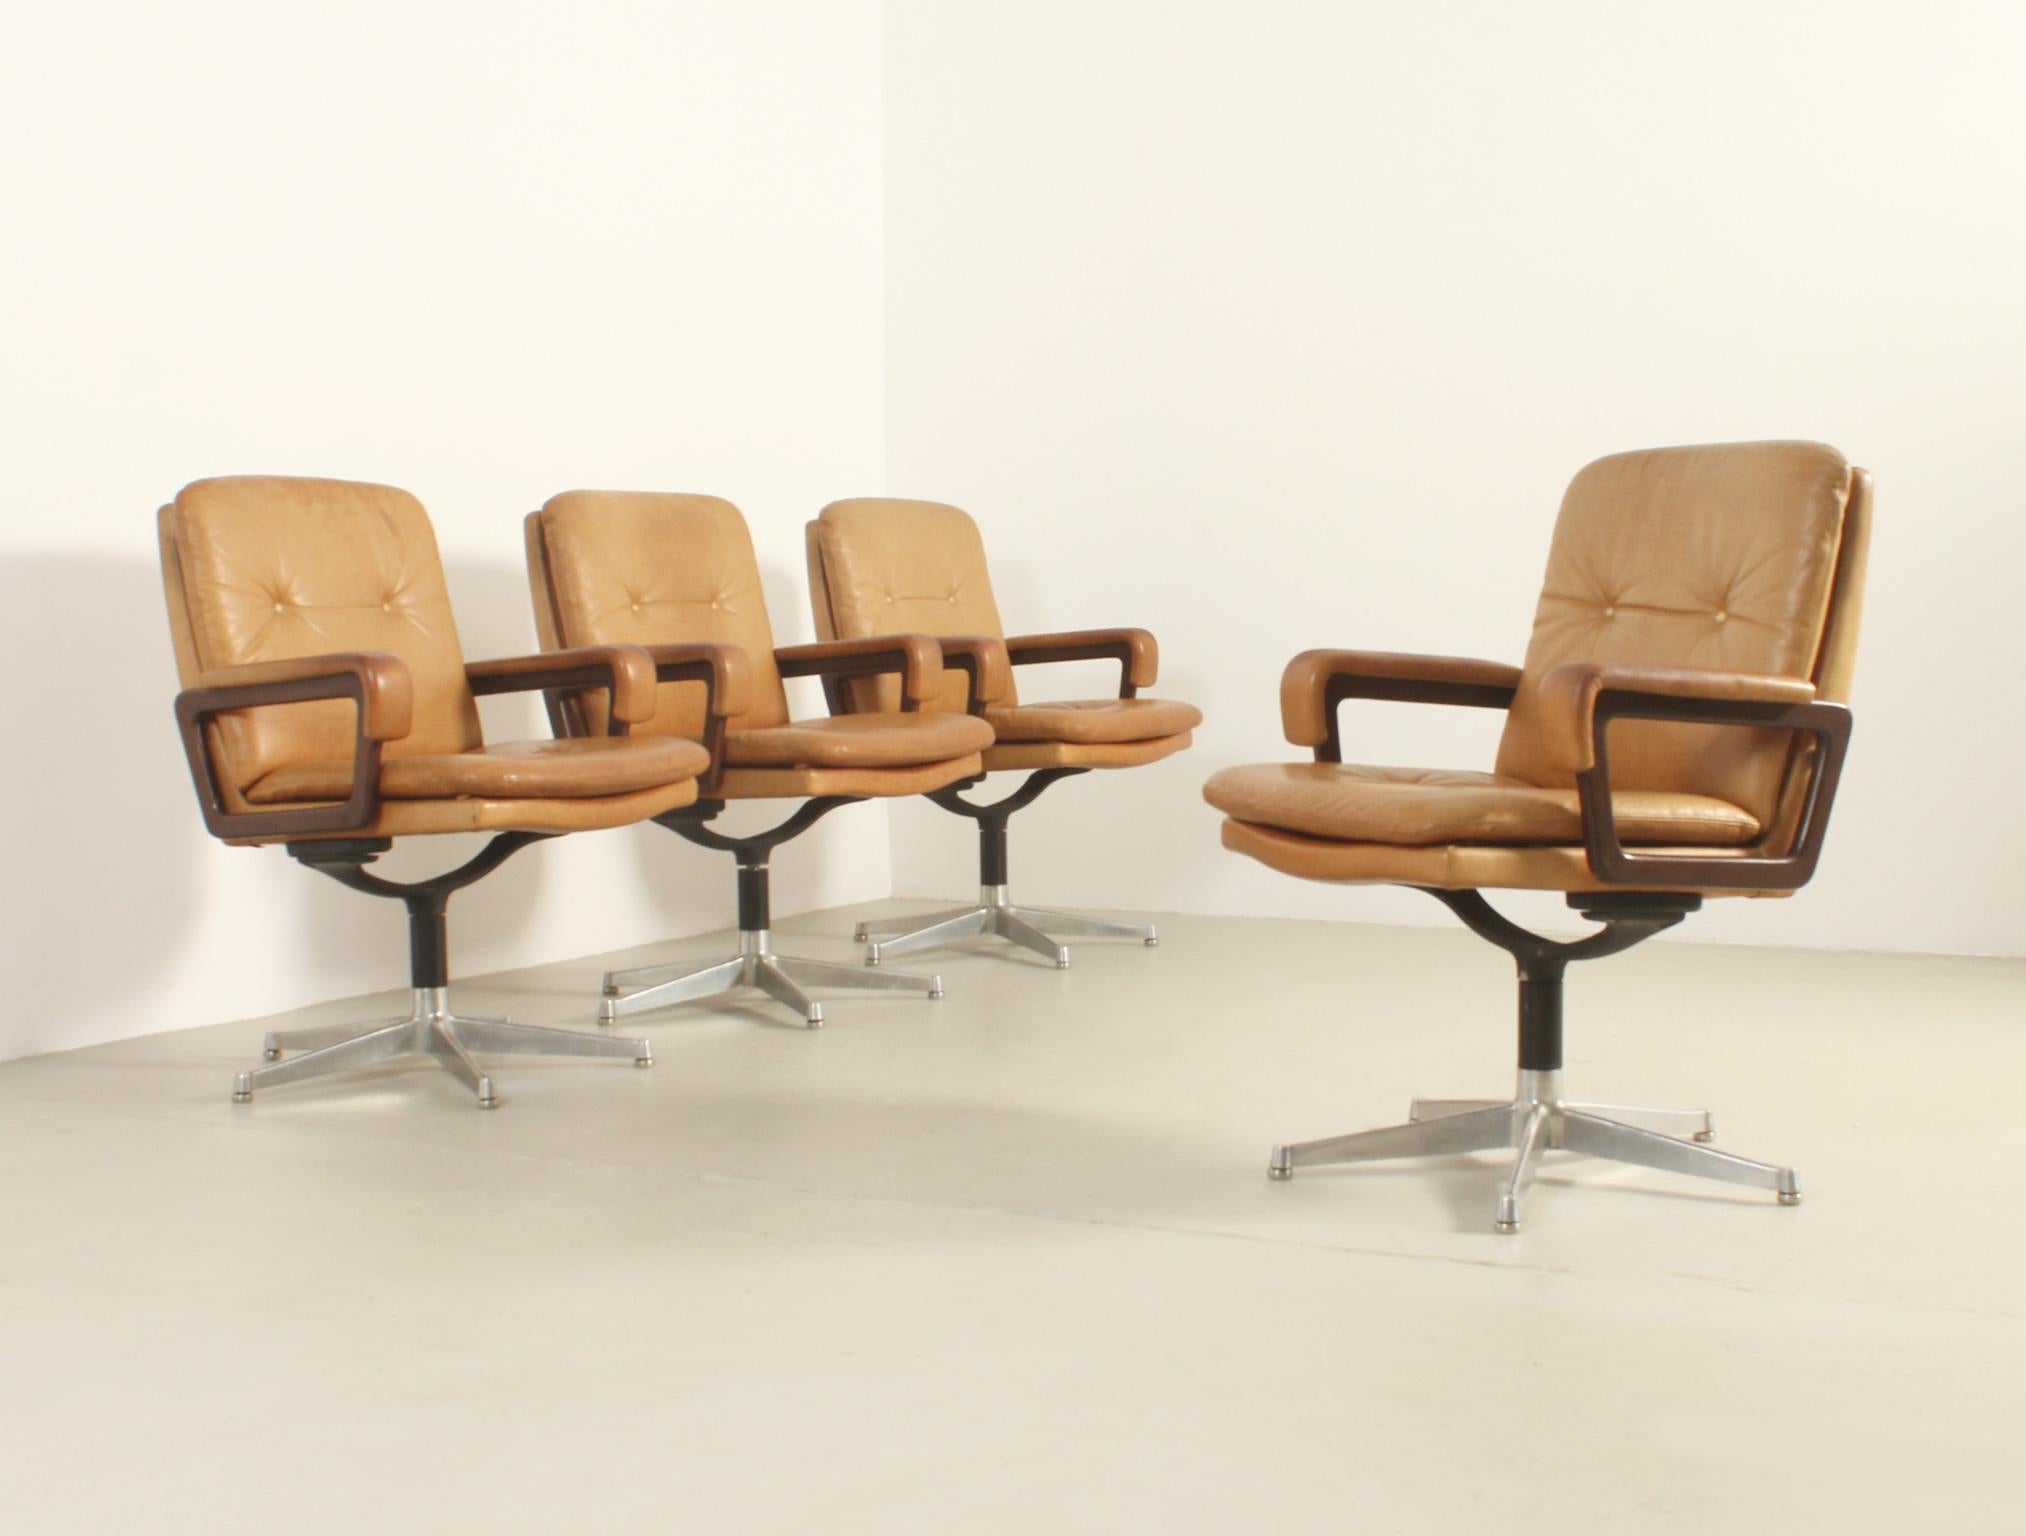 Set of four office armchairs designed by André Vandenbeuck in 1960's and produced by Arflex, Italy. Rare swivel desk version in original tan leather, wood arms and polished steel bases.